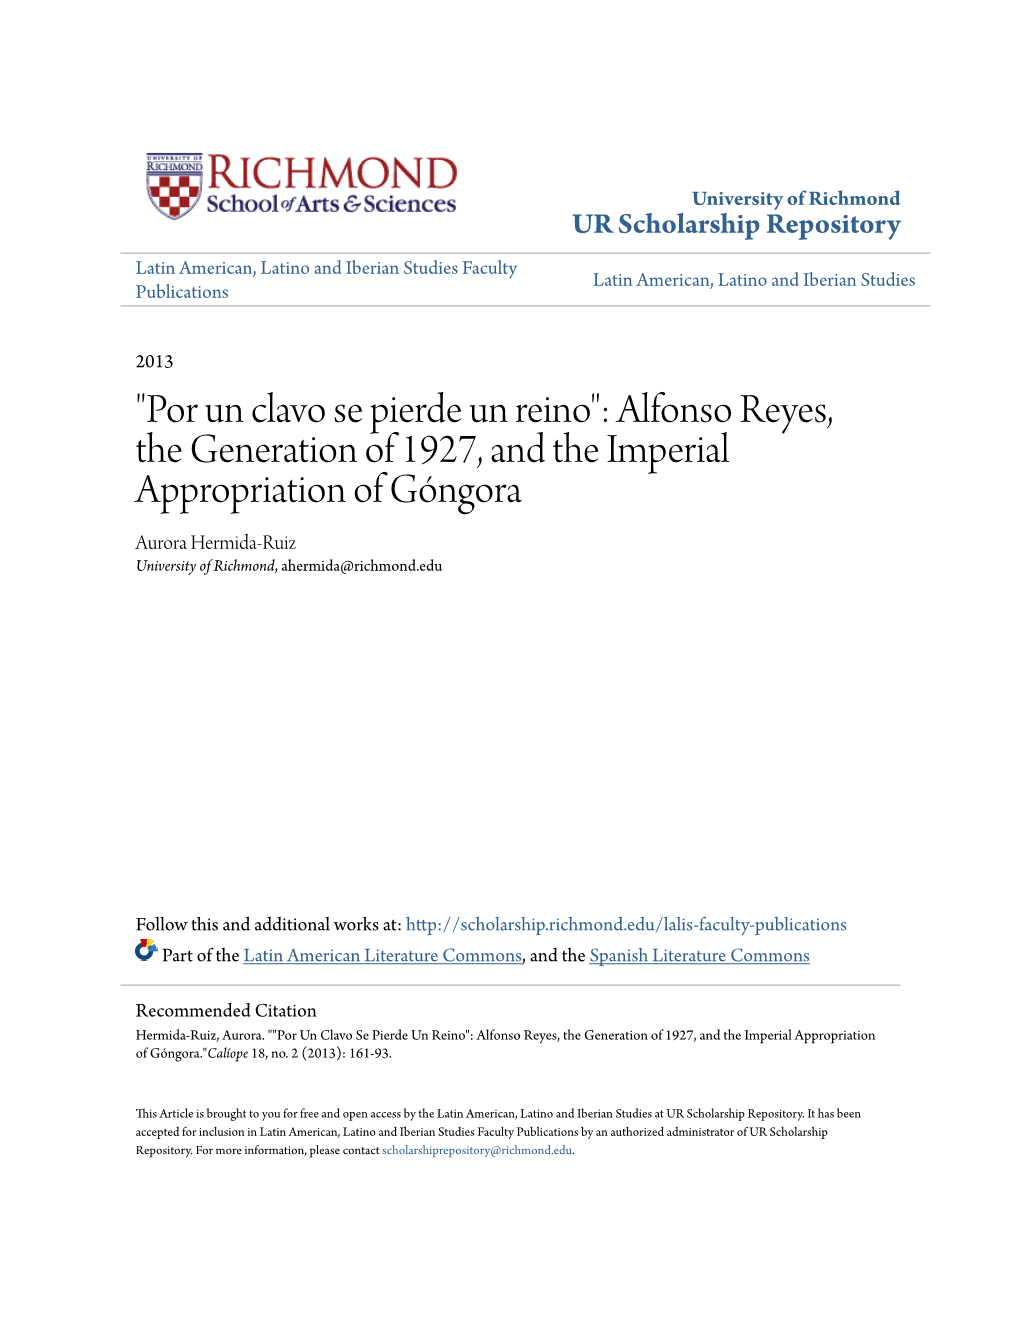 "Por Un Clavo Se Pierde Un Reino": Alfonso Reyes, the Generation of 1927, and the Imperial Appropriation of Góngora